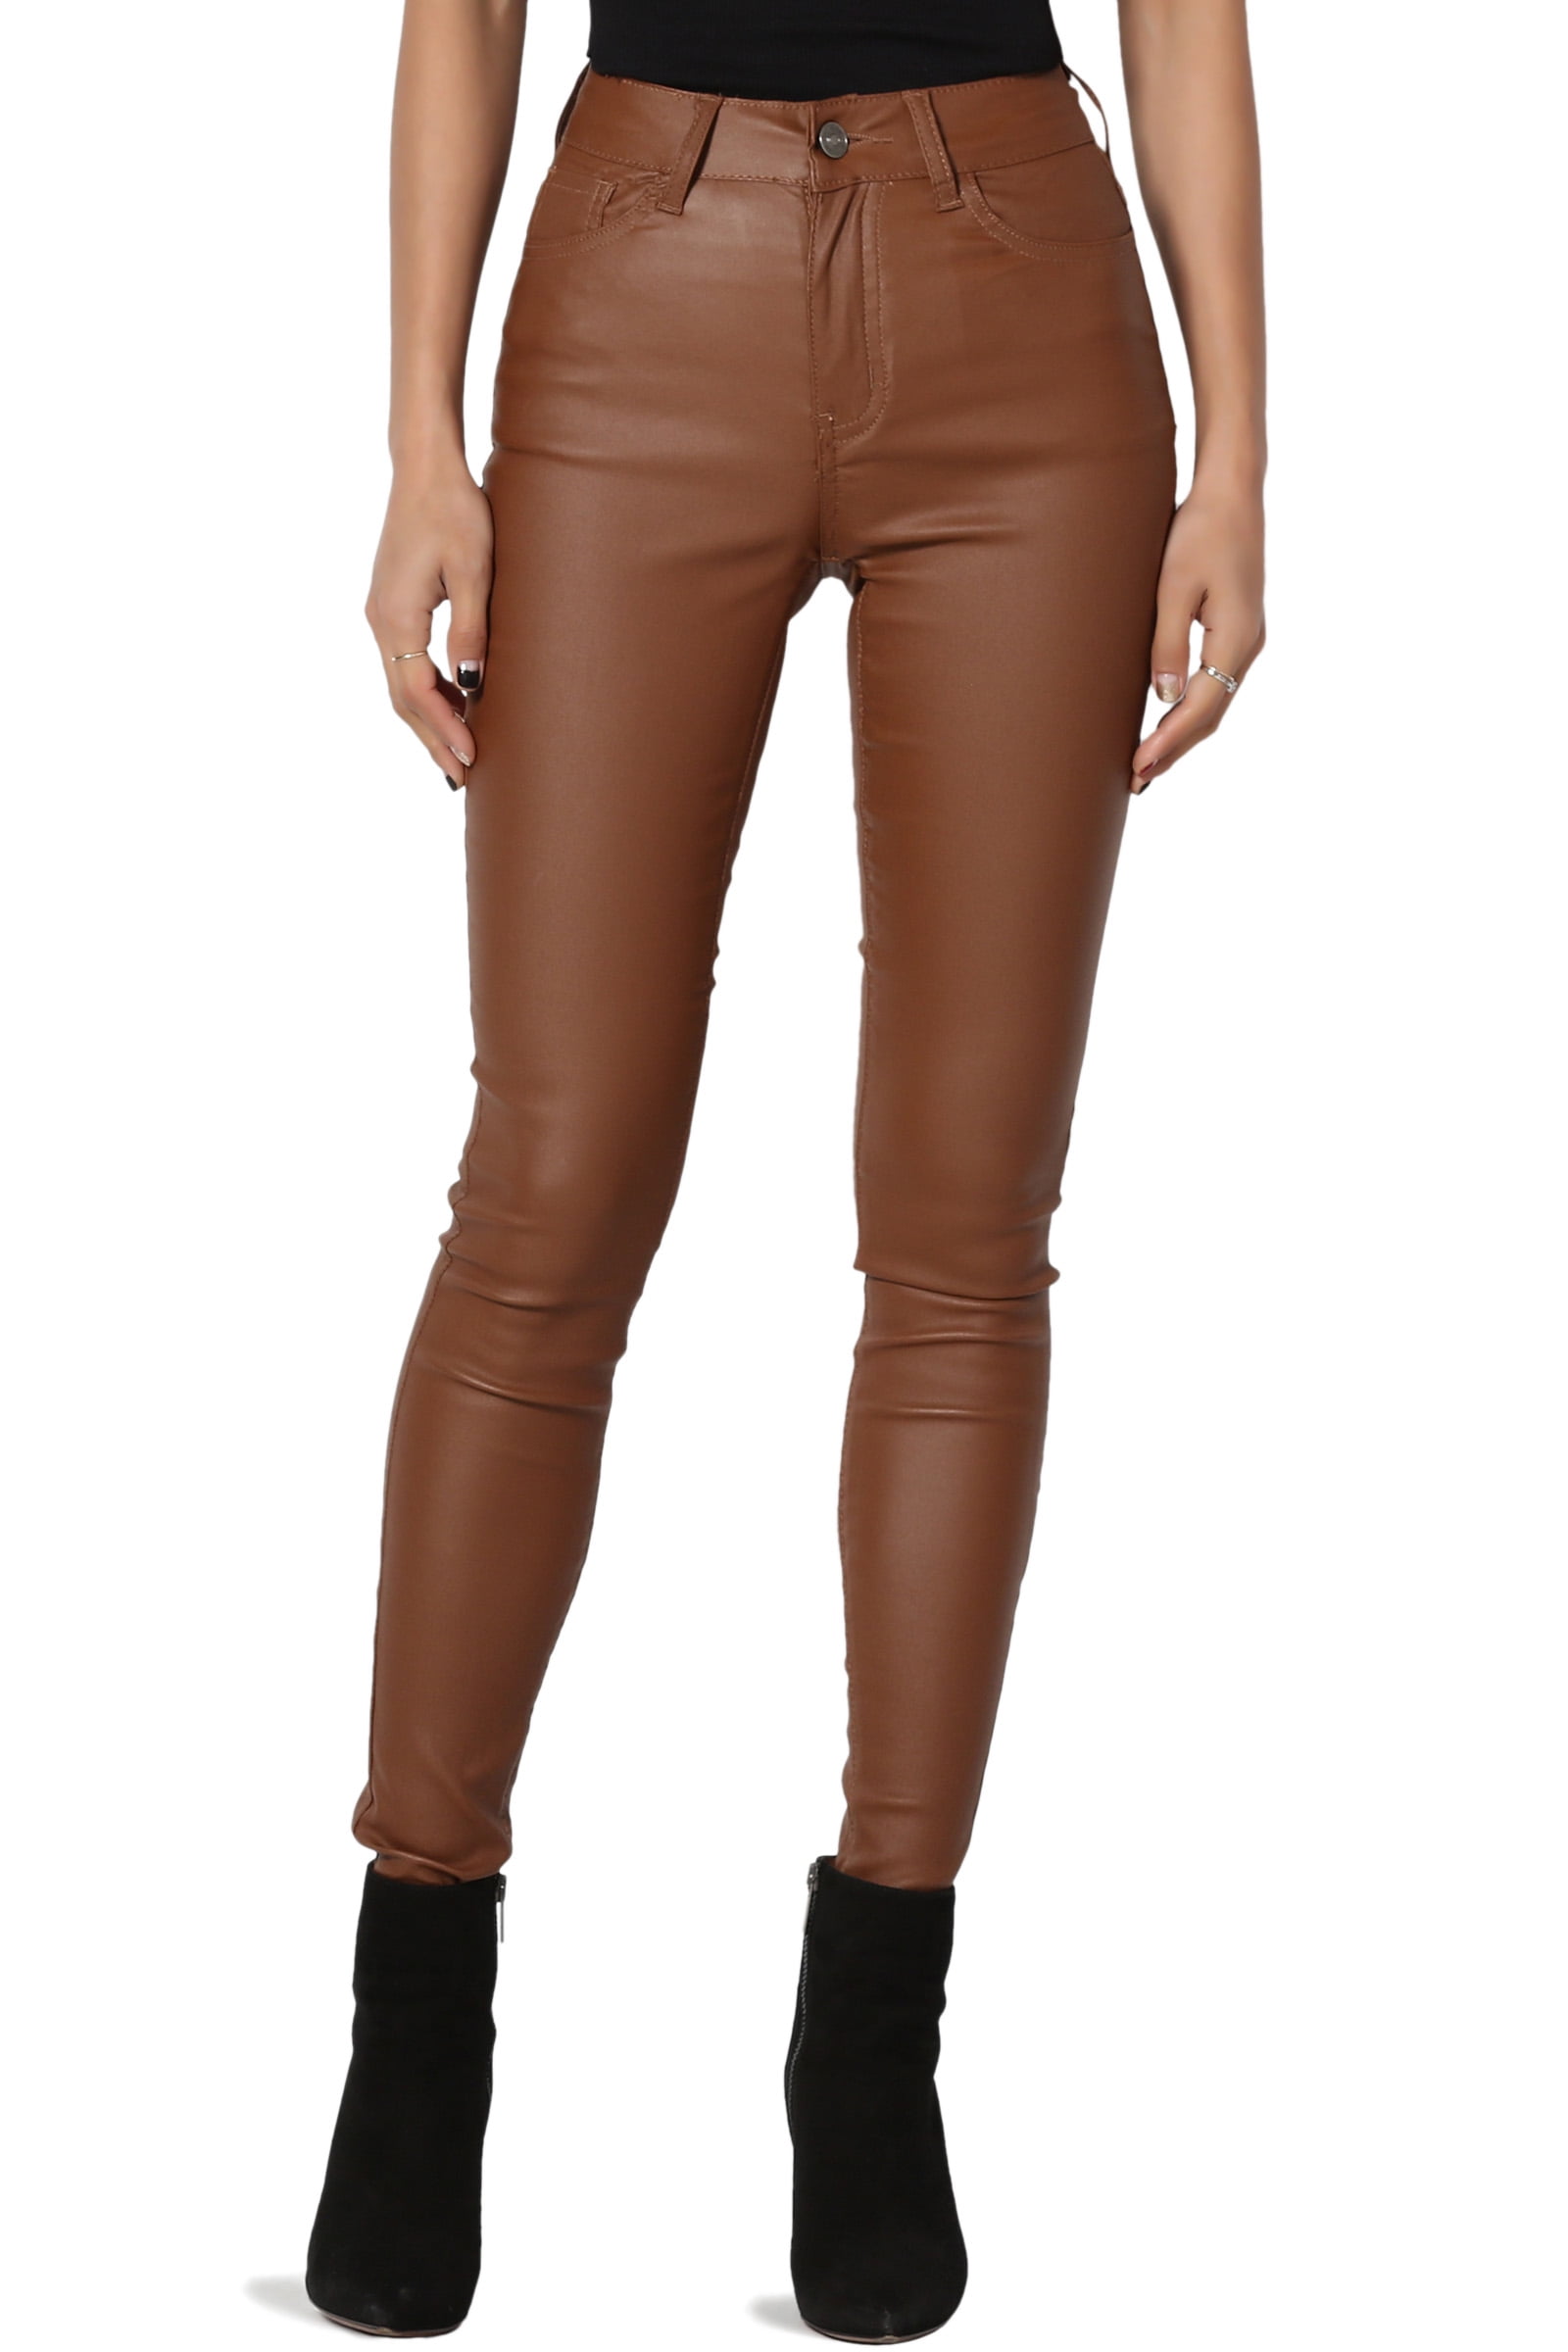 Crazy Womens High Waist Skinny Fit Faux Leather Biker Pants Slim Trousers